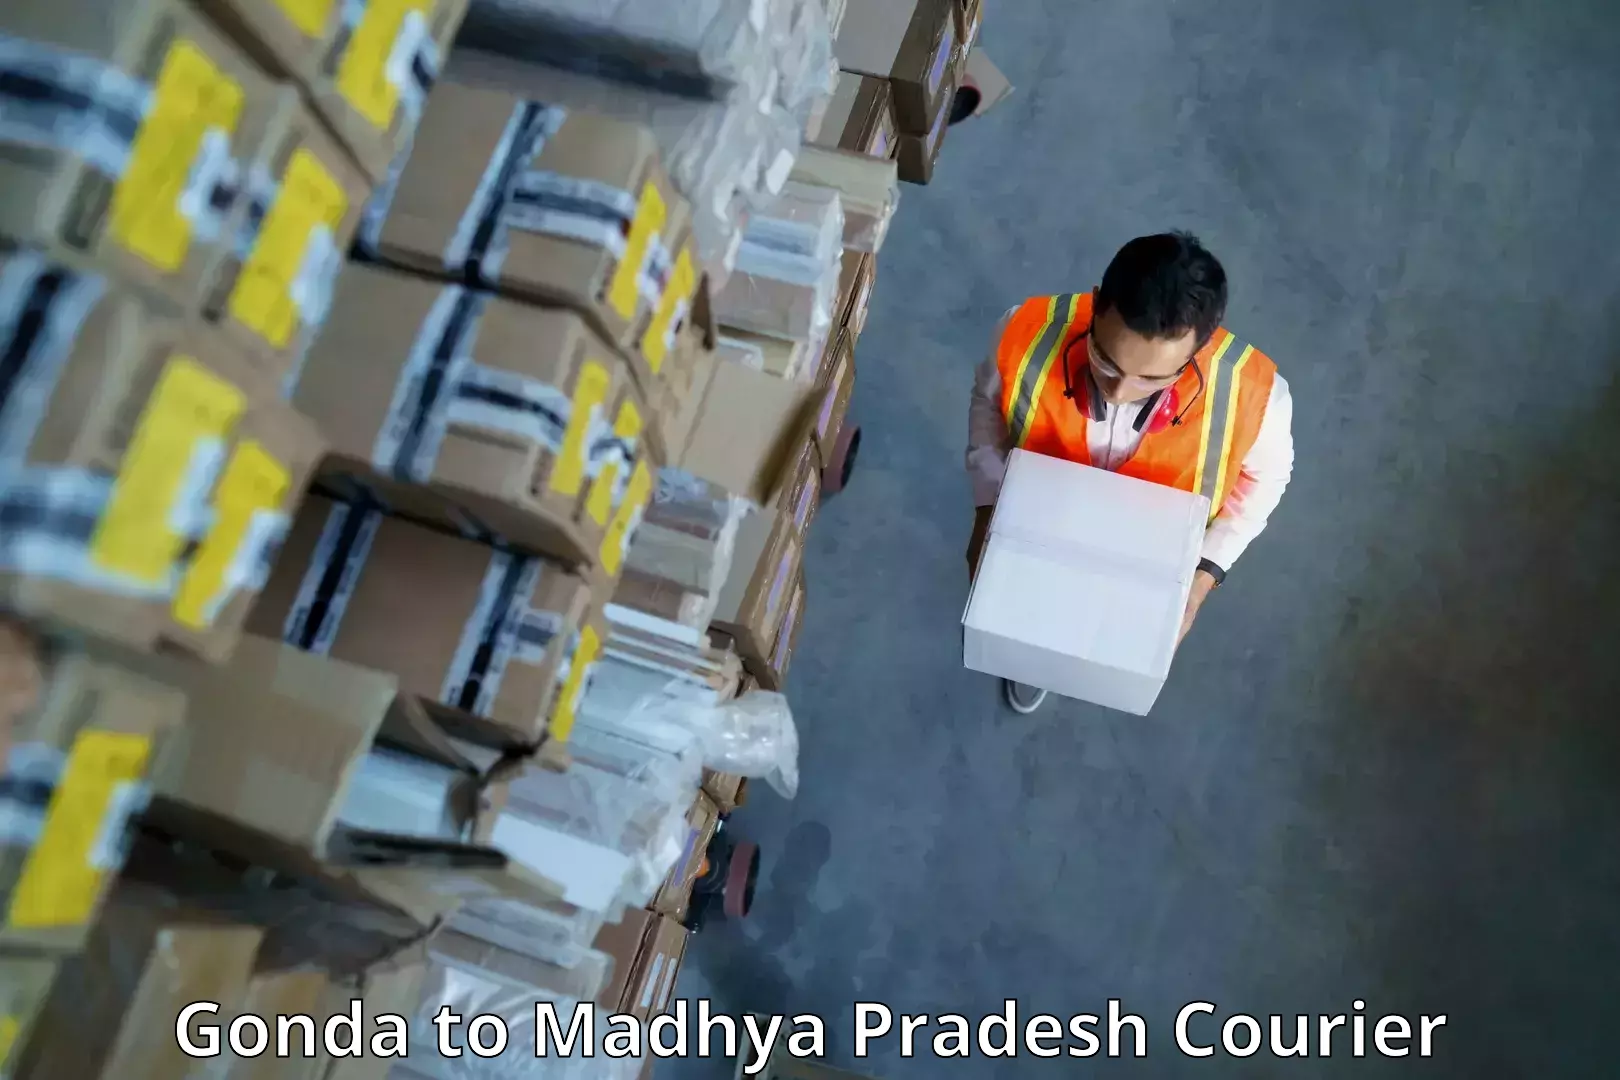 On-call courier service Gonda to Dabra